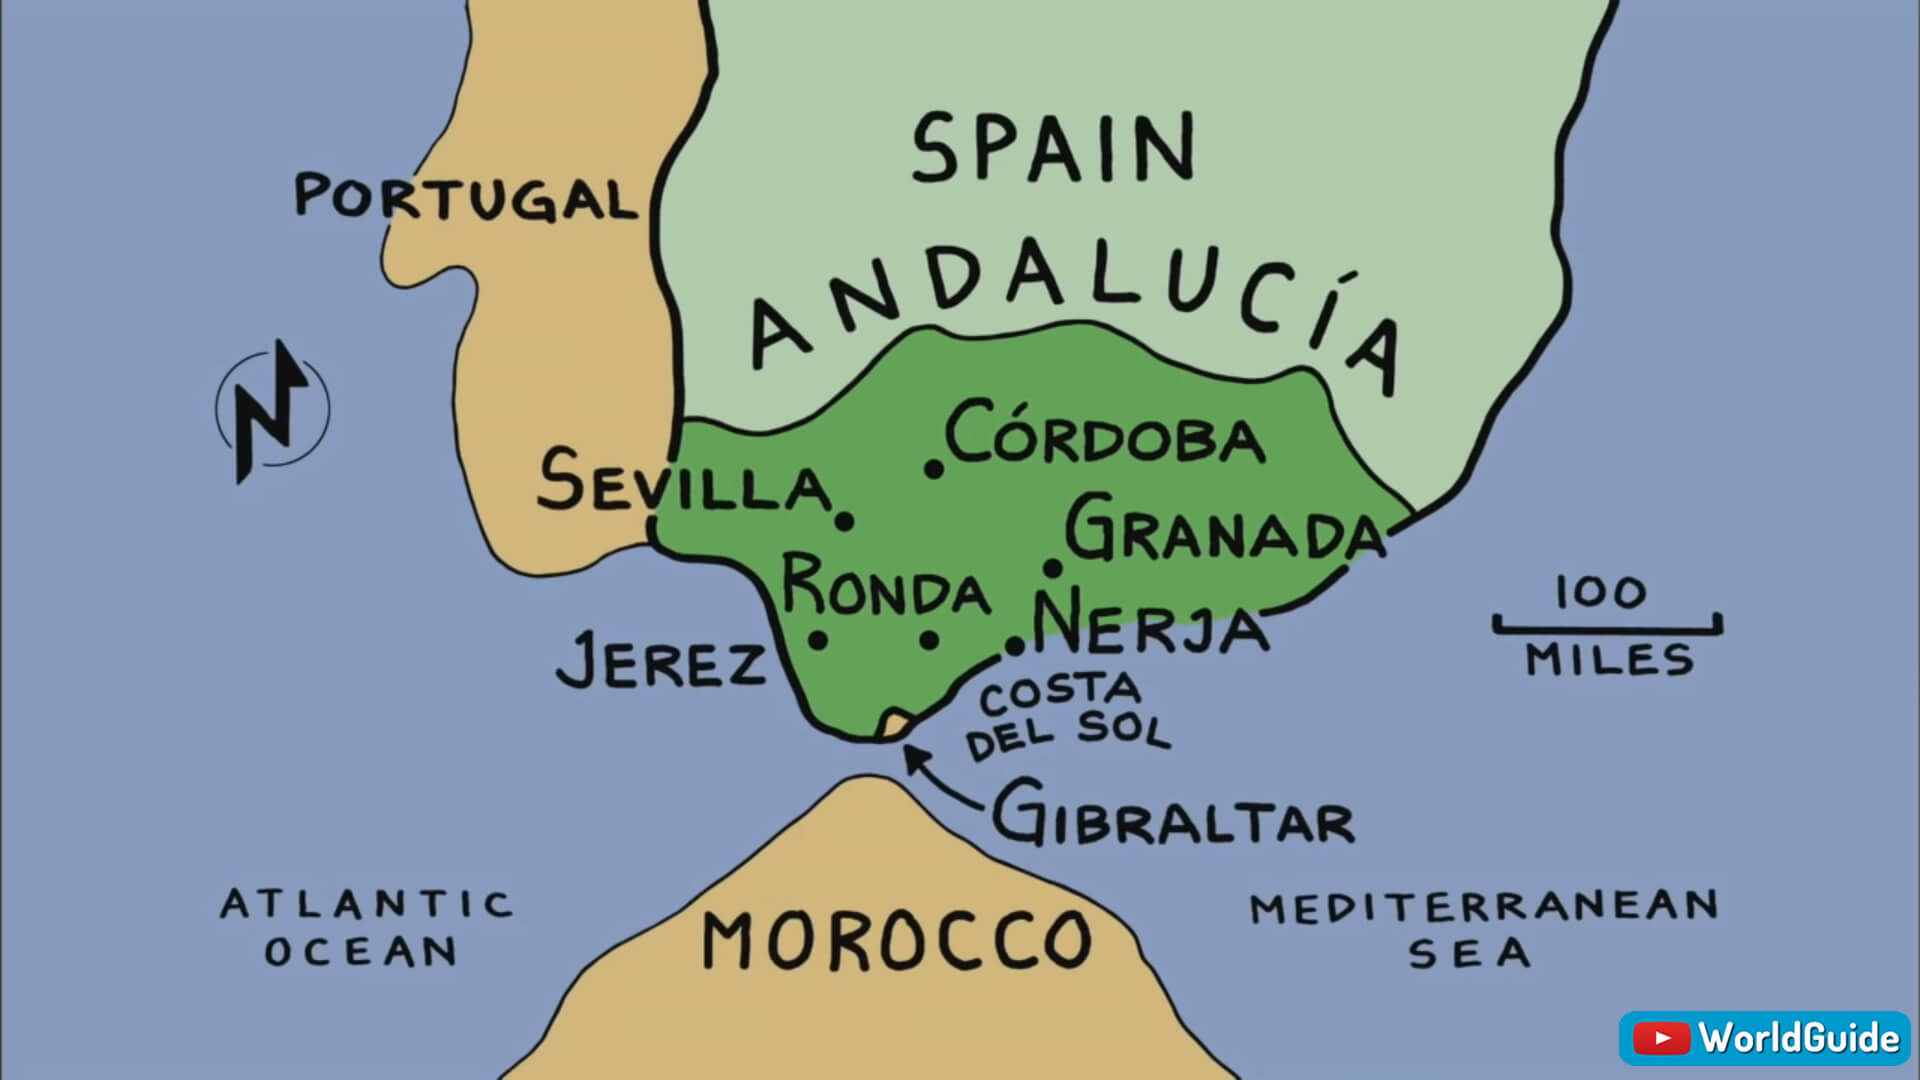 Andalucia Spain Travel Map